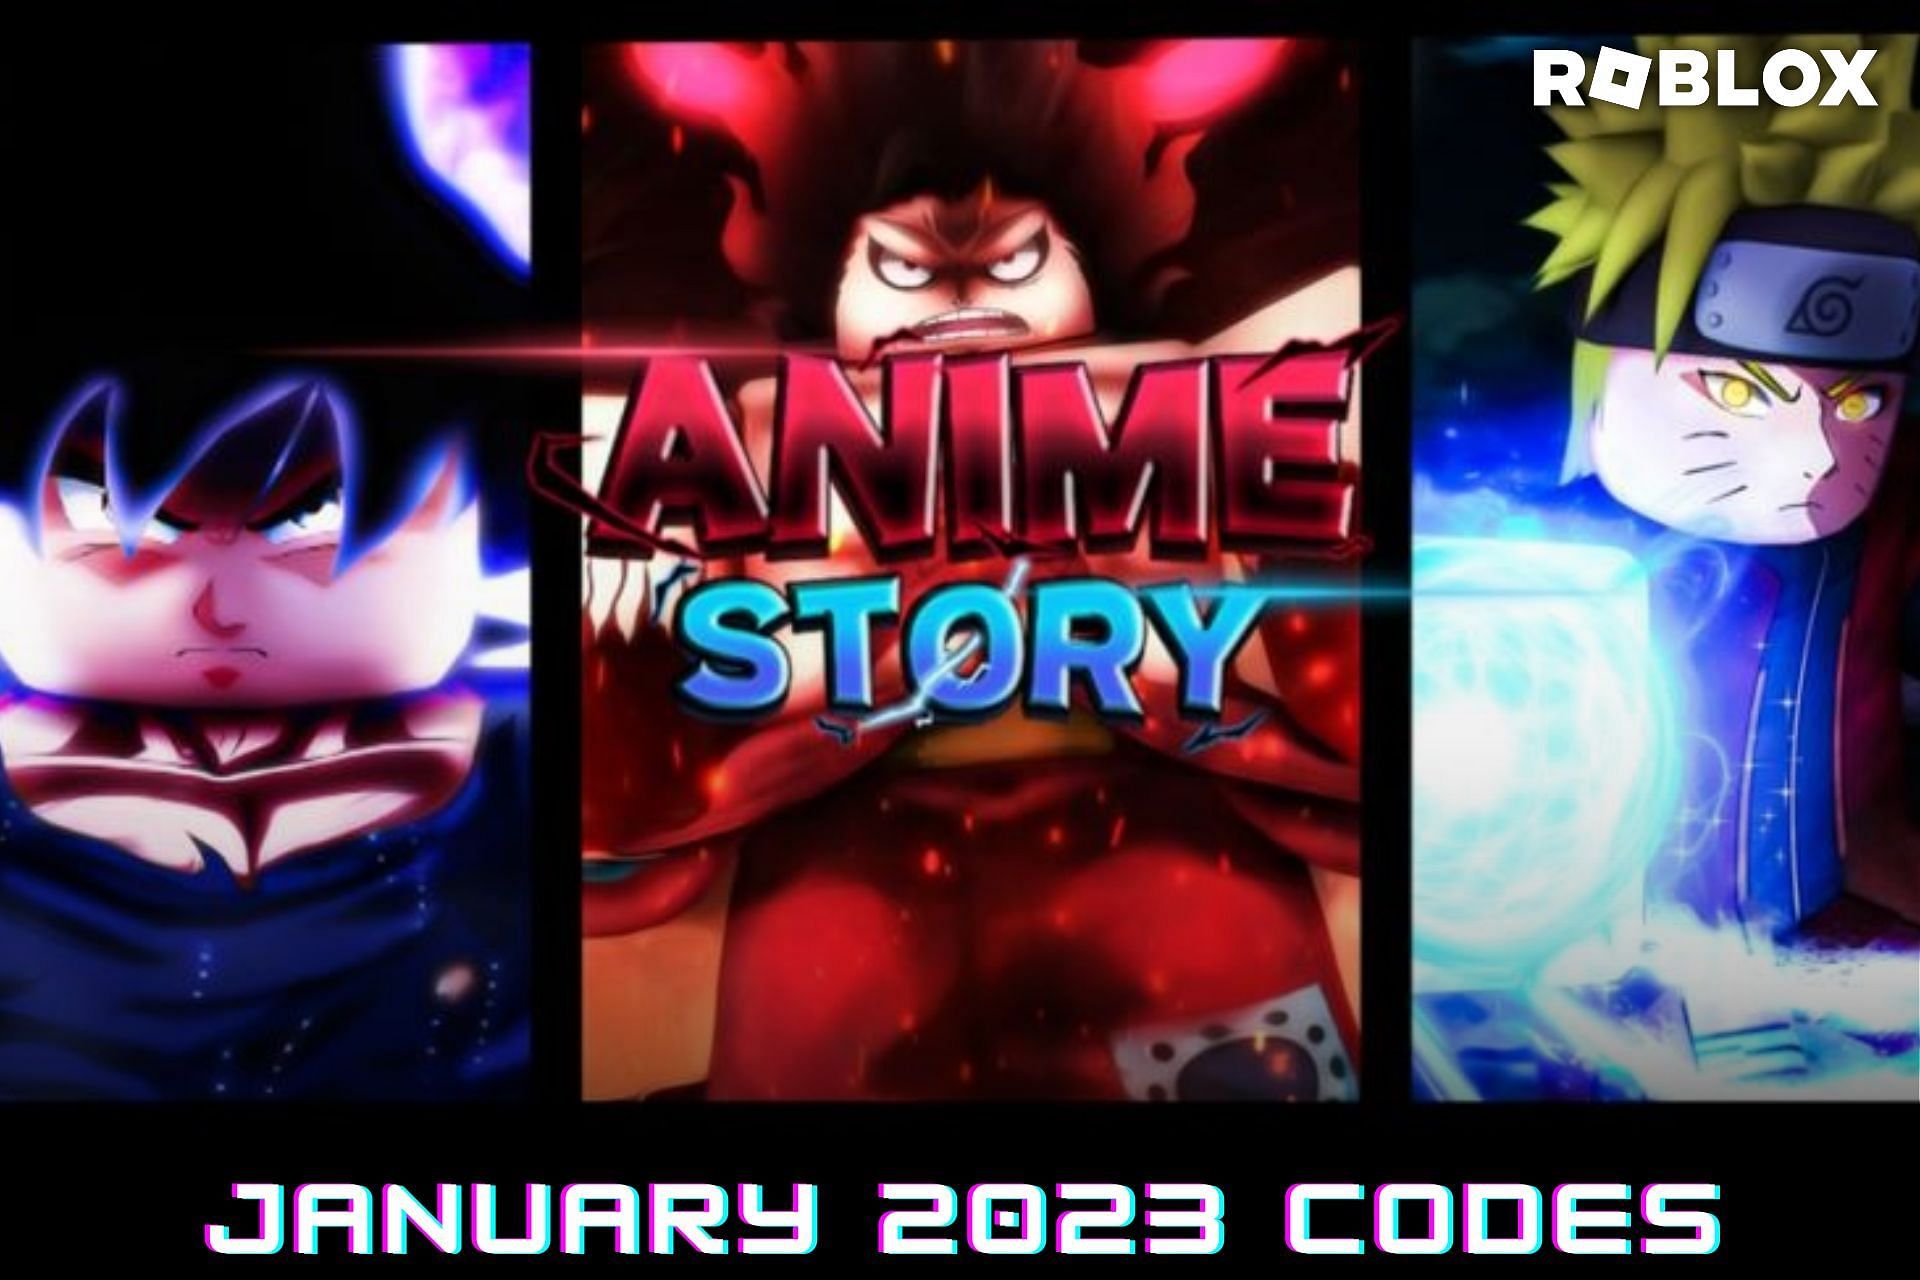 Roblox Anime Story codes for January 2023 Freebies